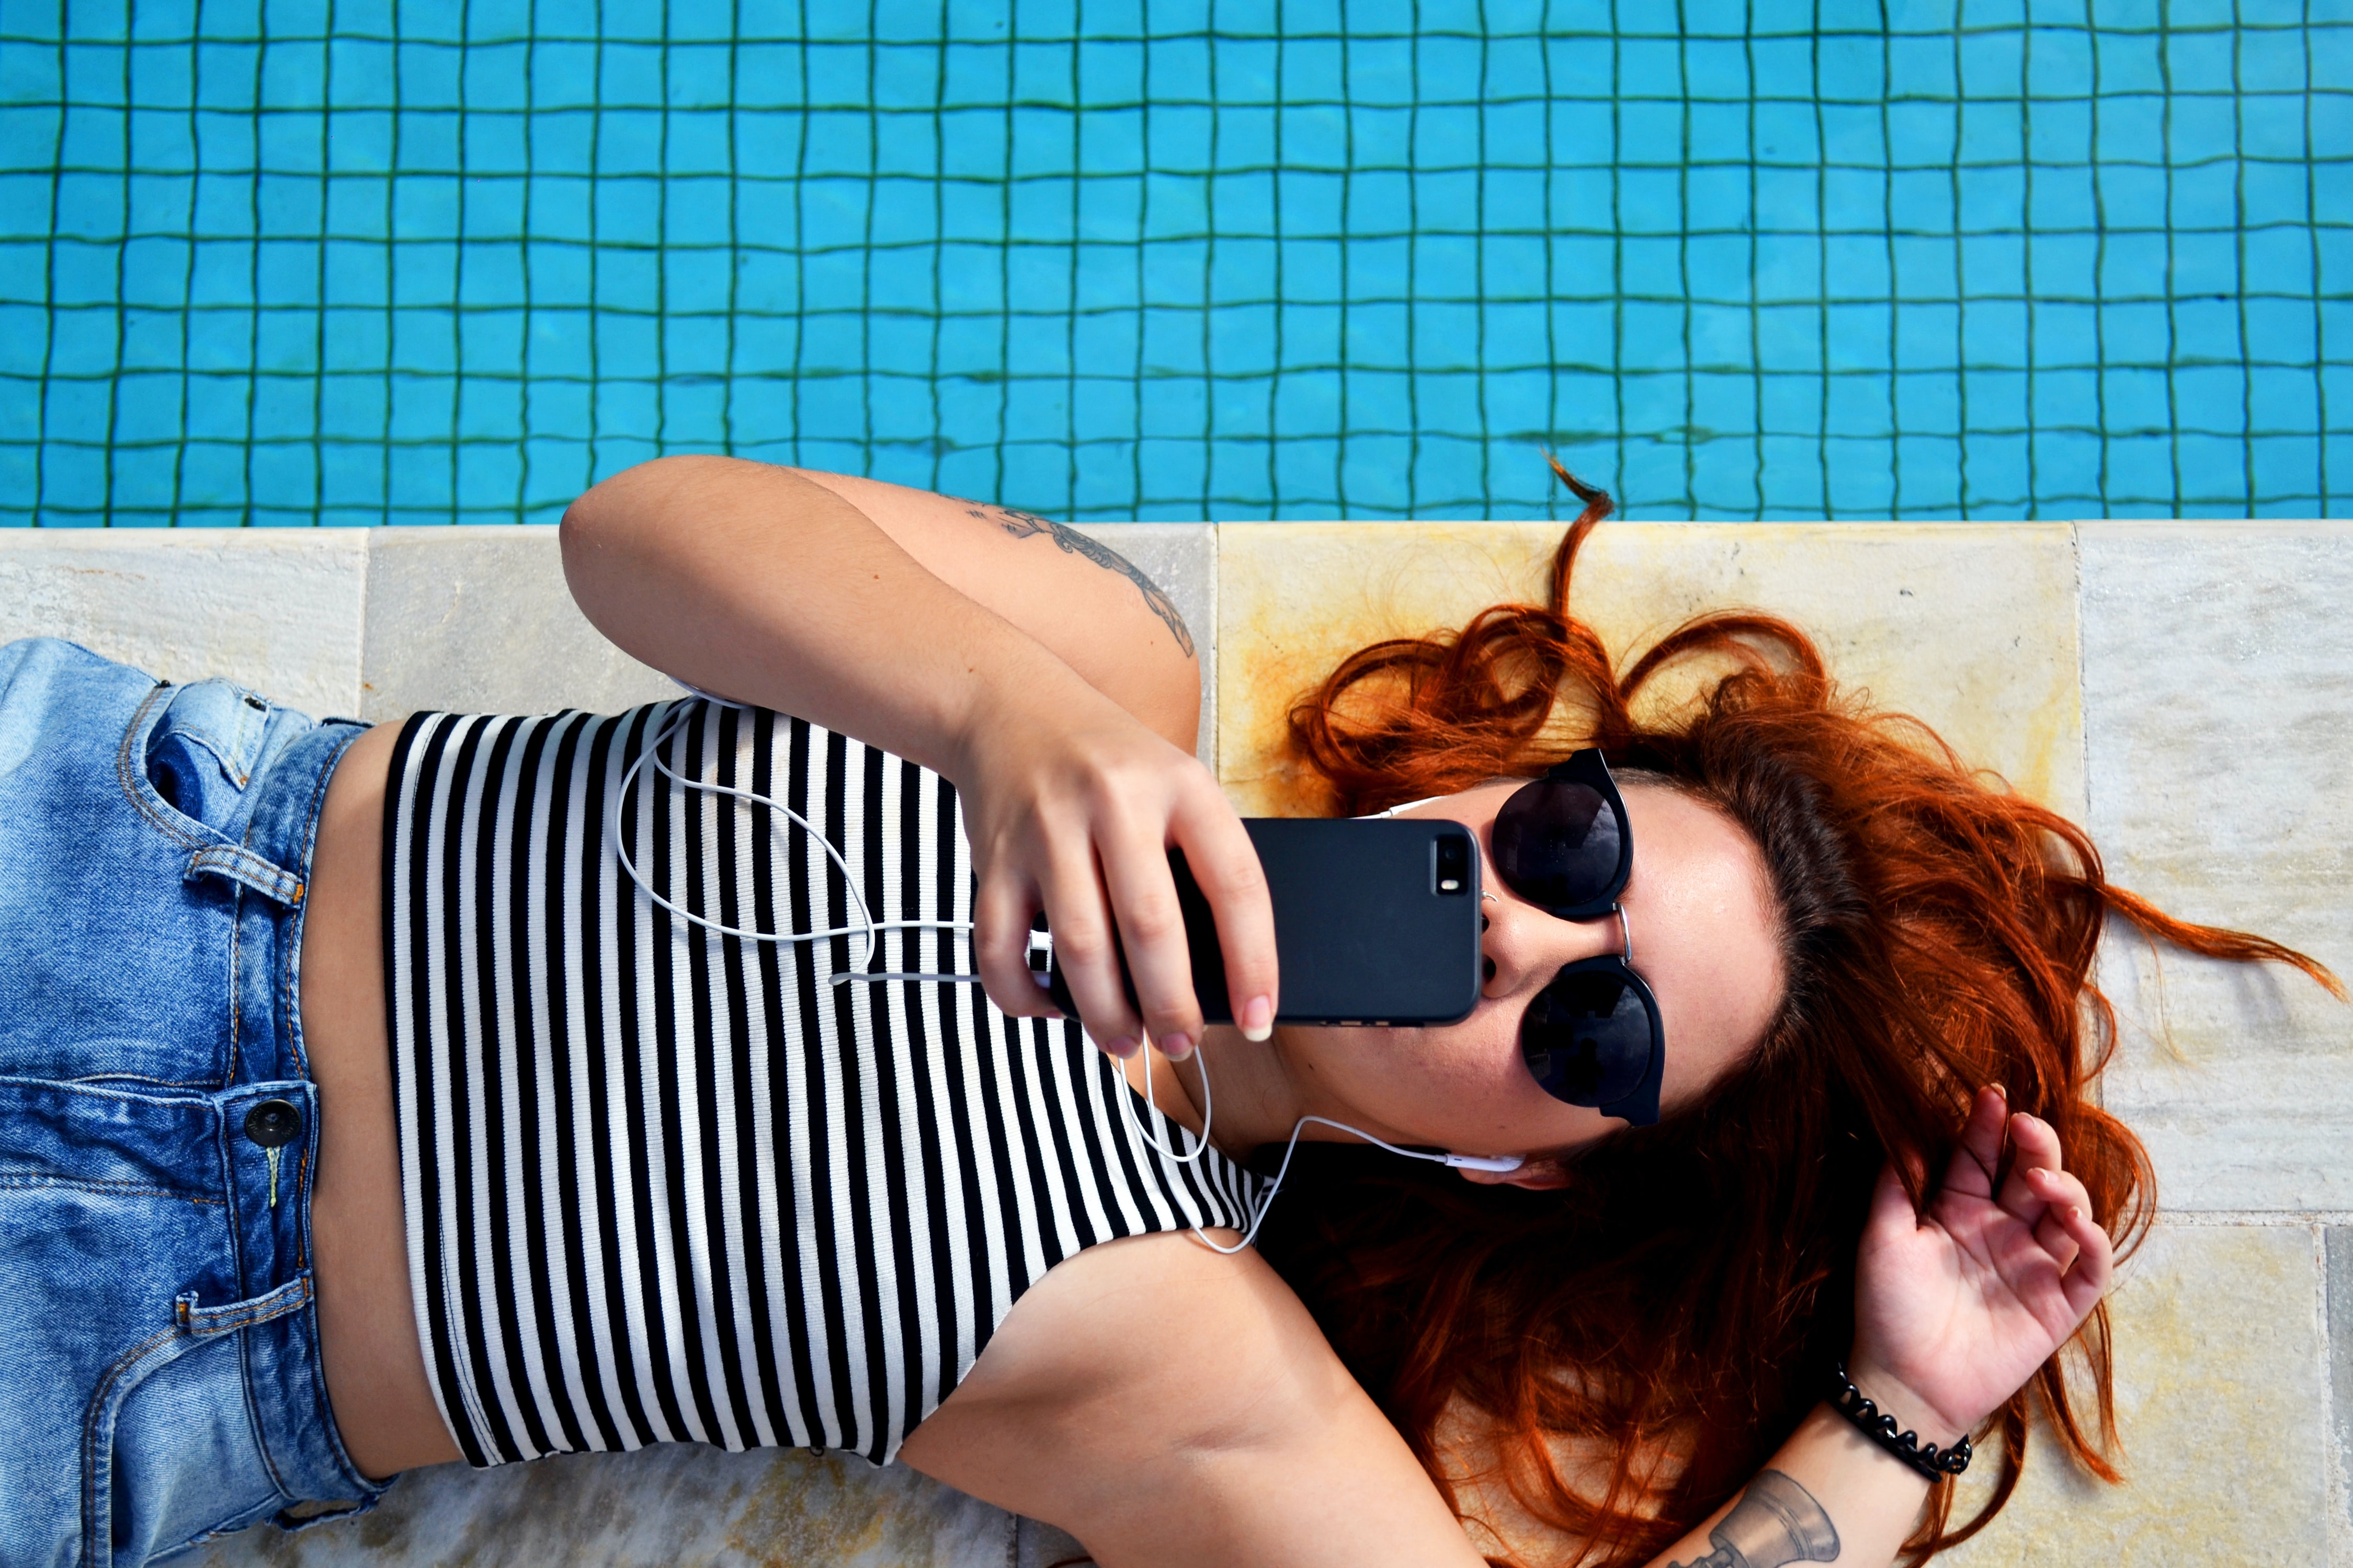 Young woman next to swimming pool, checking her phone